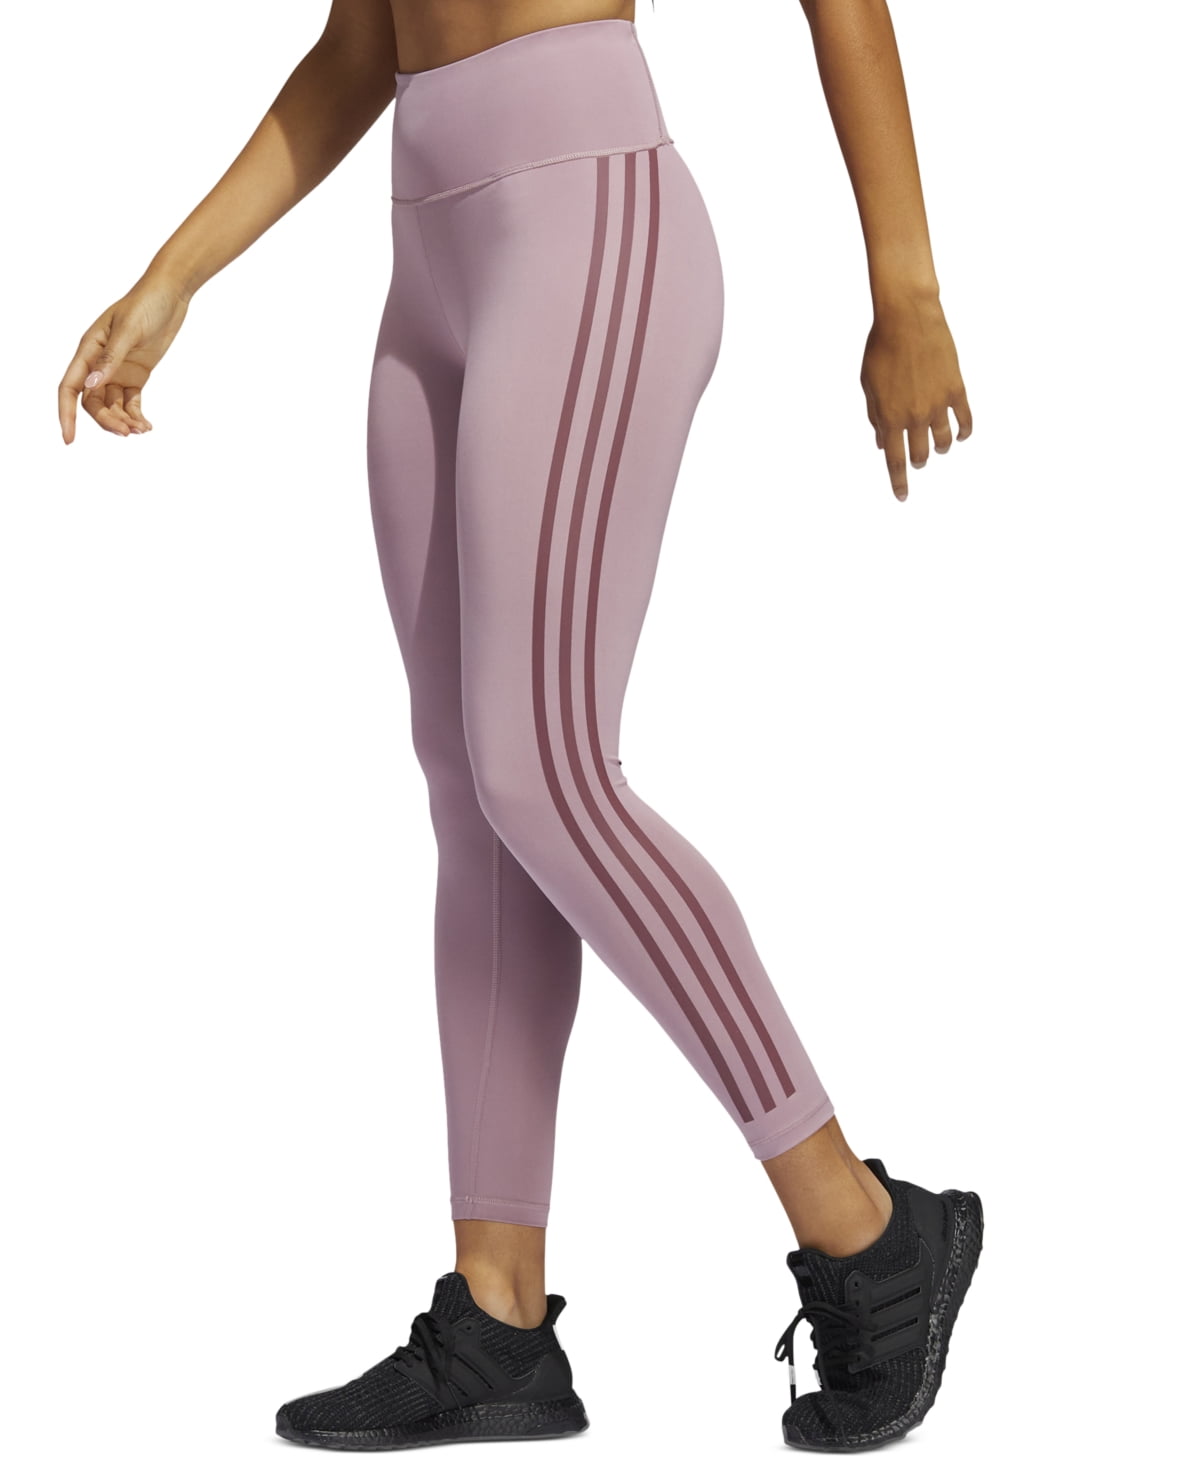 Adidas Believe This Tight 2.0 Women's Leggings Size Small S Tech